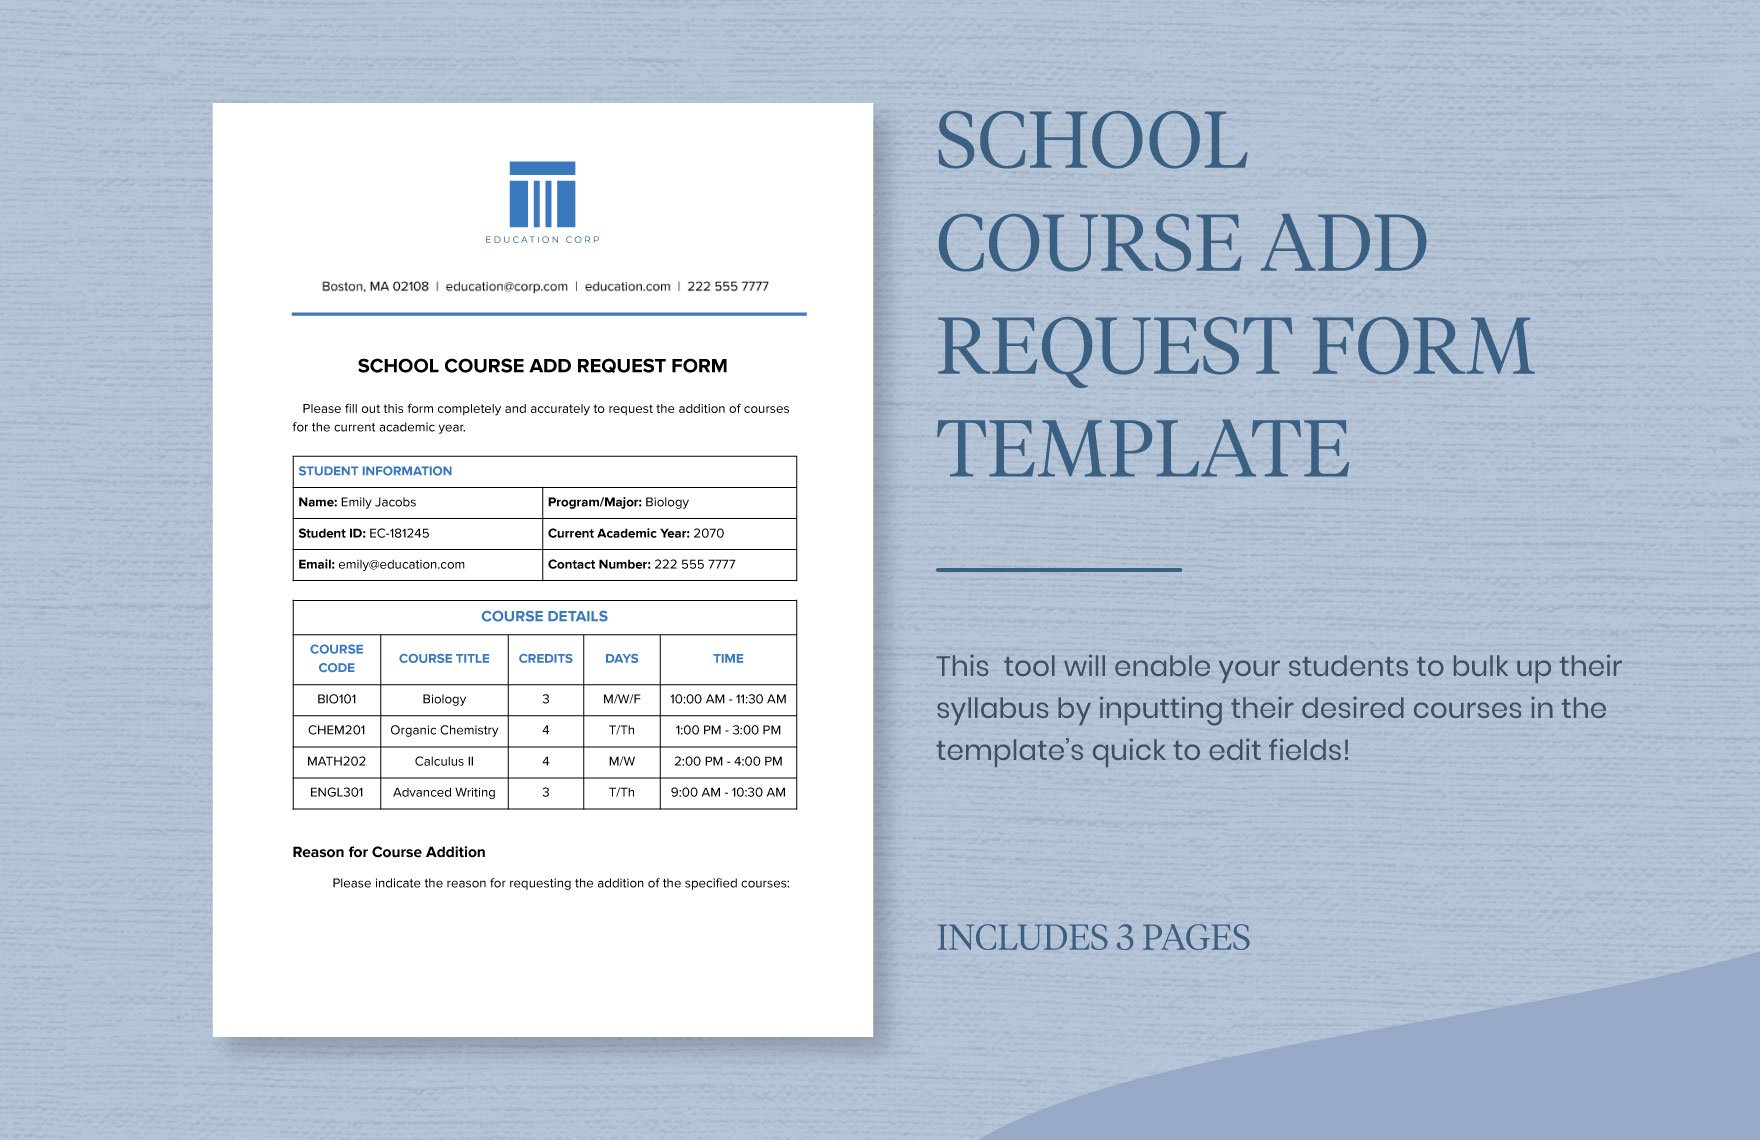 School Course Add Request Form Template